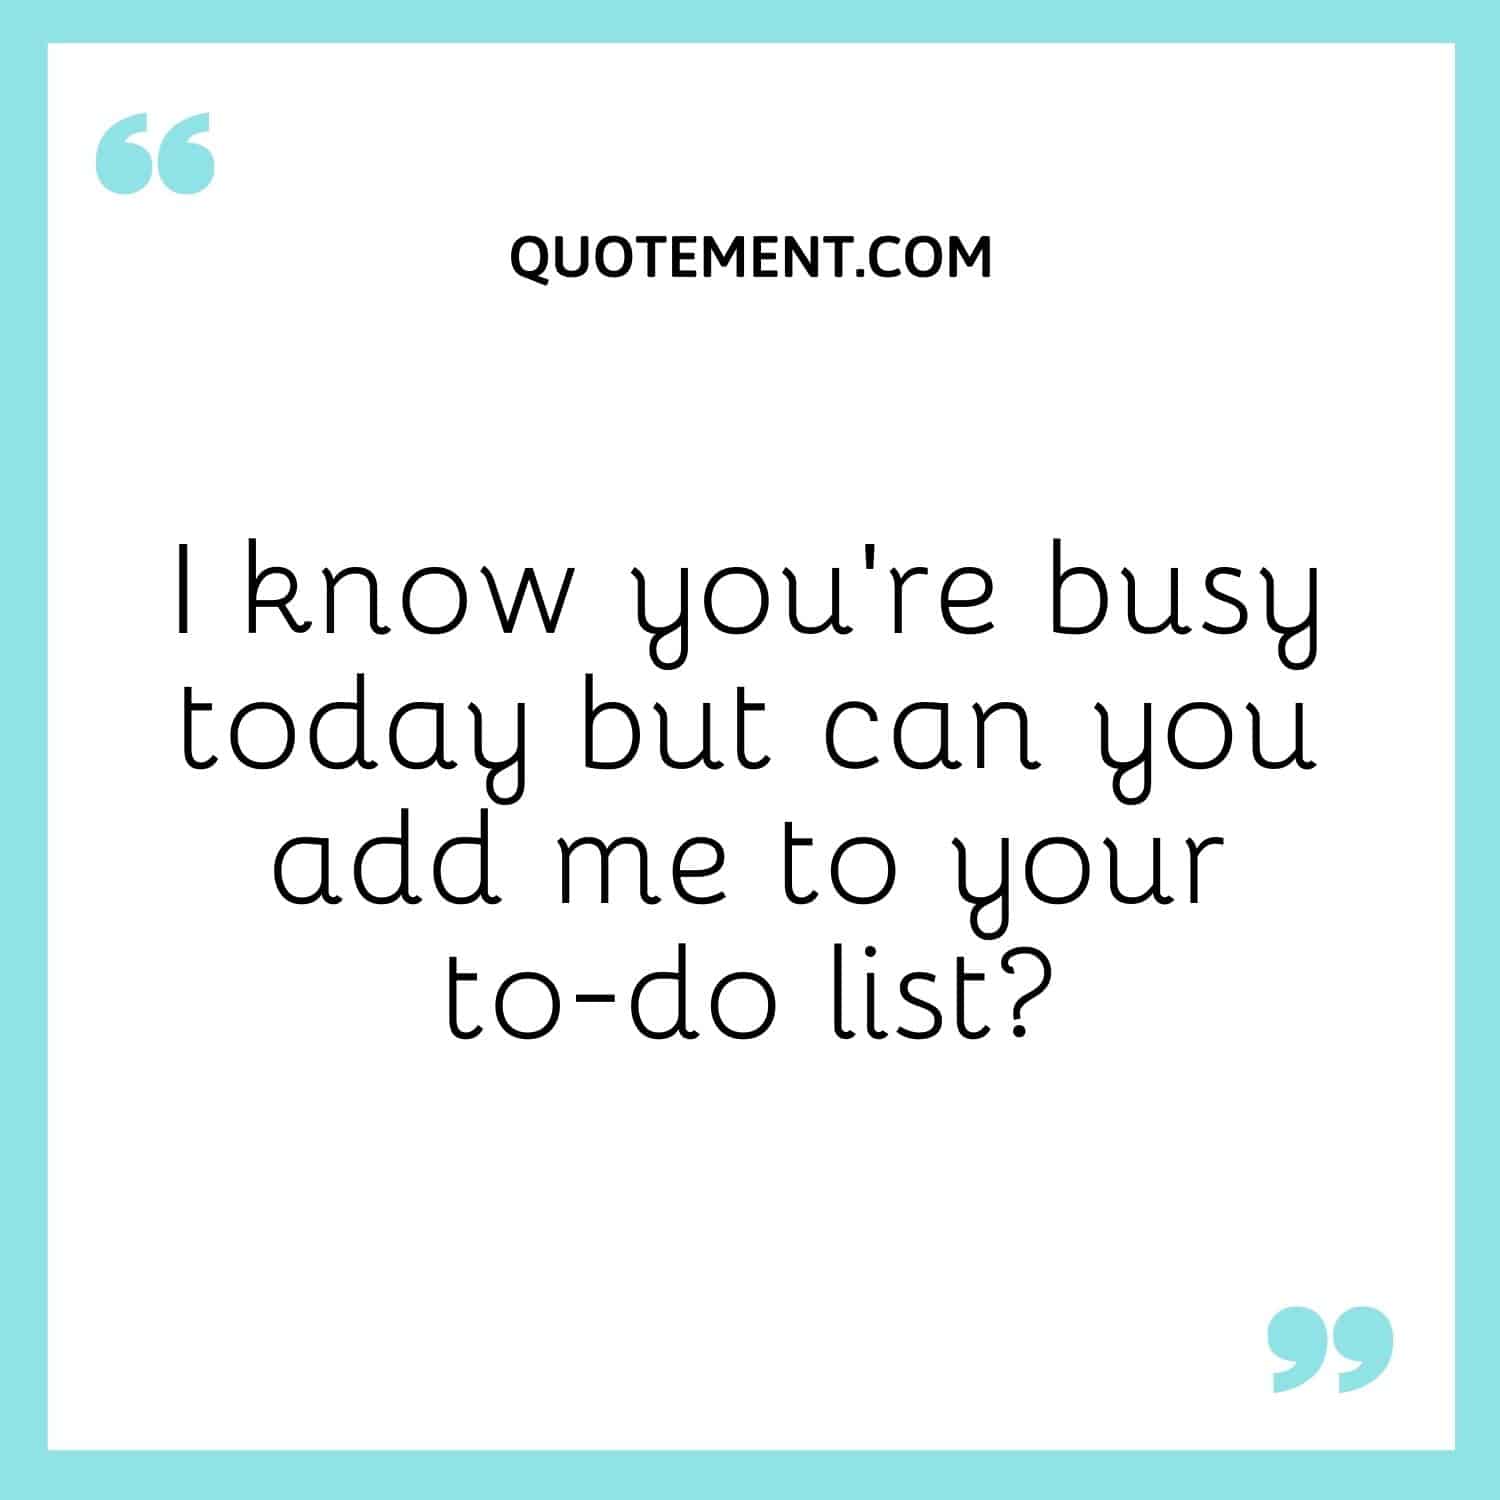 I know you’re busy today but can you add me to your to-do list